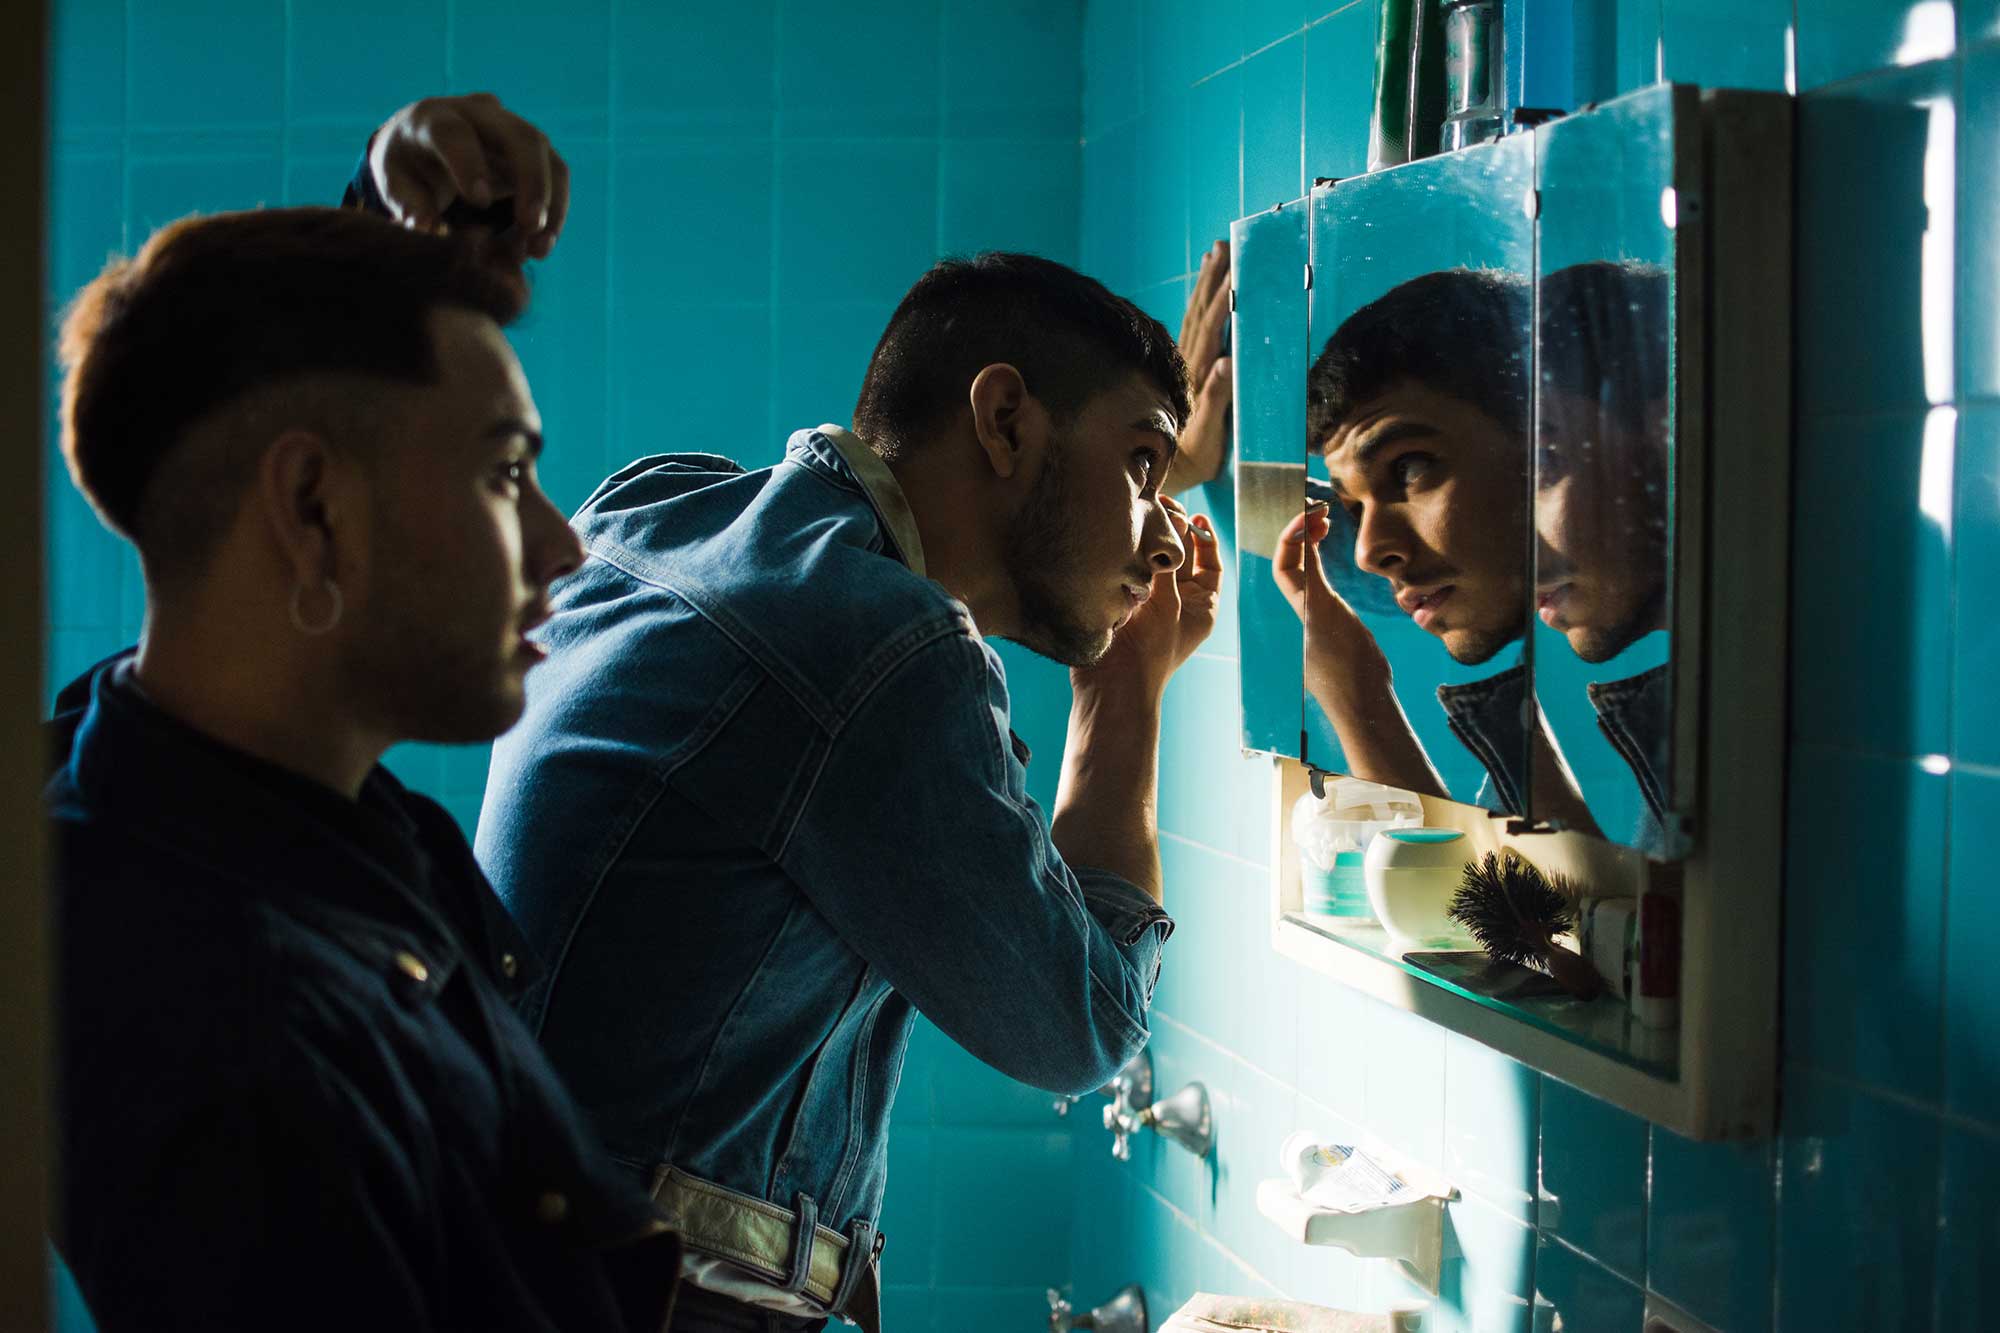 Gay latino couple in the bathroom grooming and getting ready before going out. They are in denim outfits in a blue tiled bathroom with a sink and mirror.